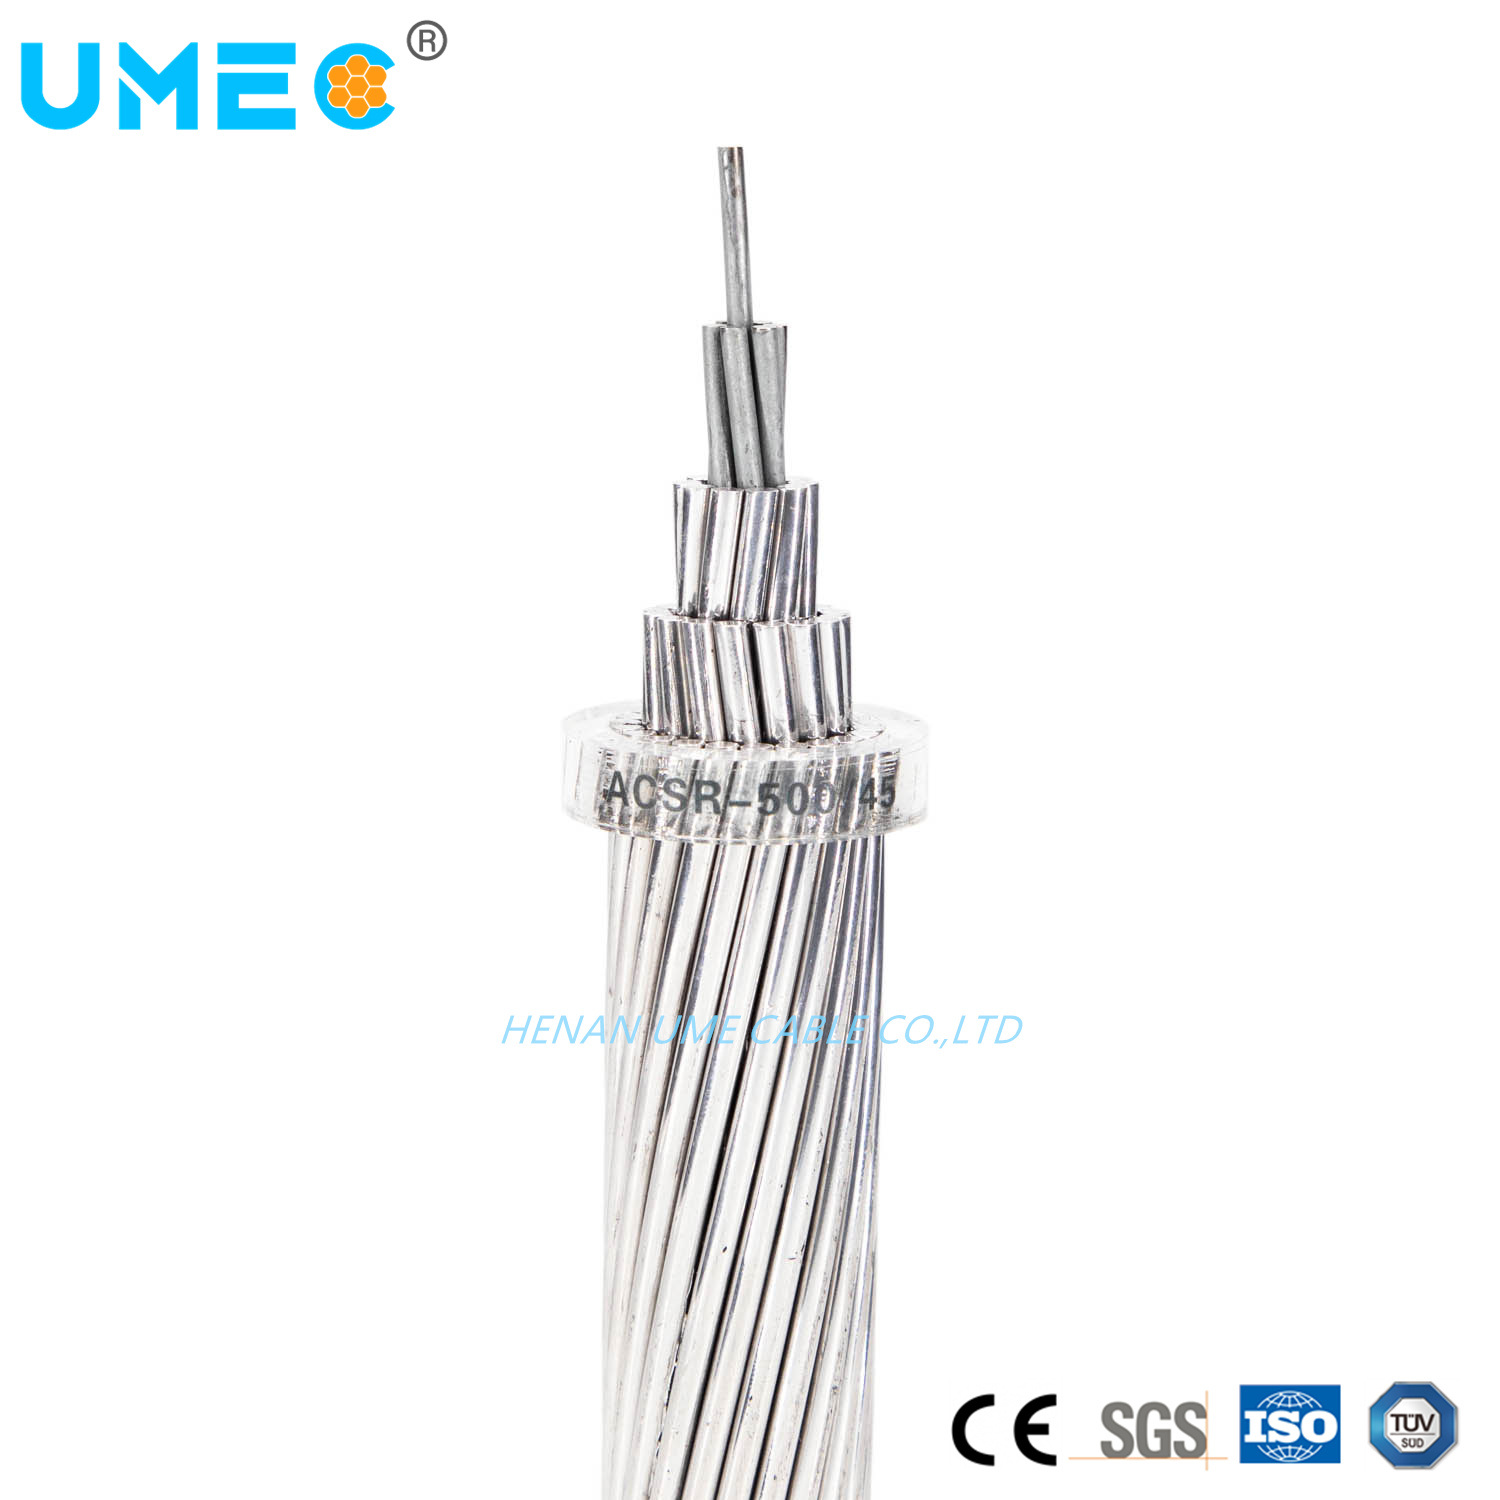 Transmission Line Bare Conductor Aluminum Conductor Steel Reinforced ACSR/Aw